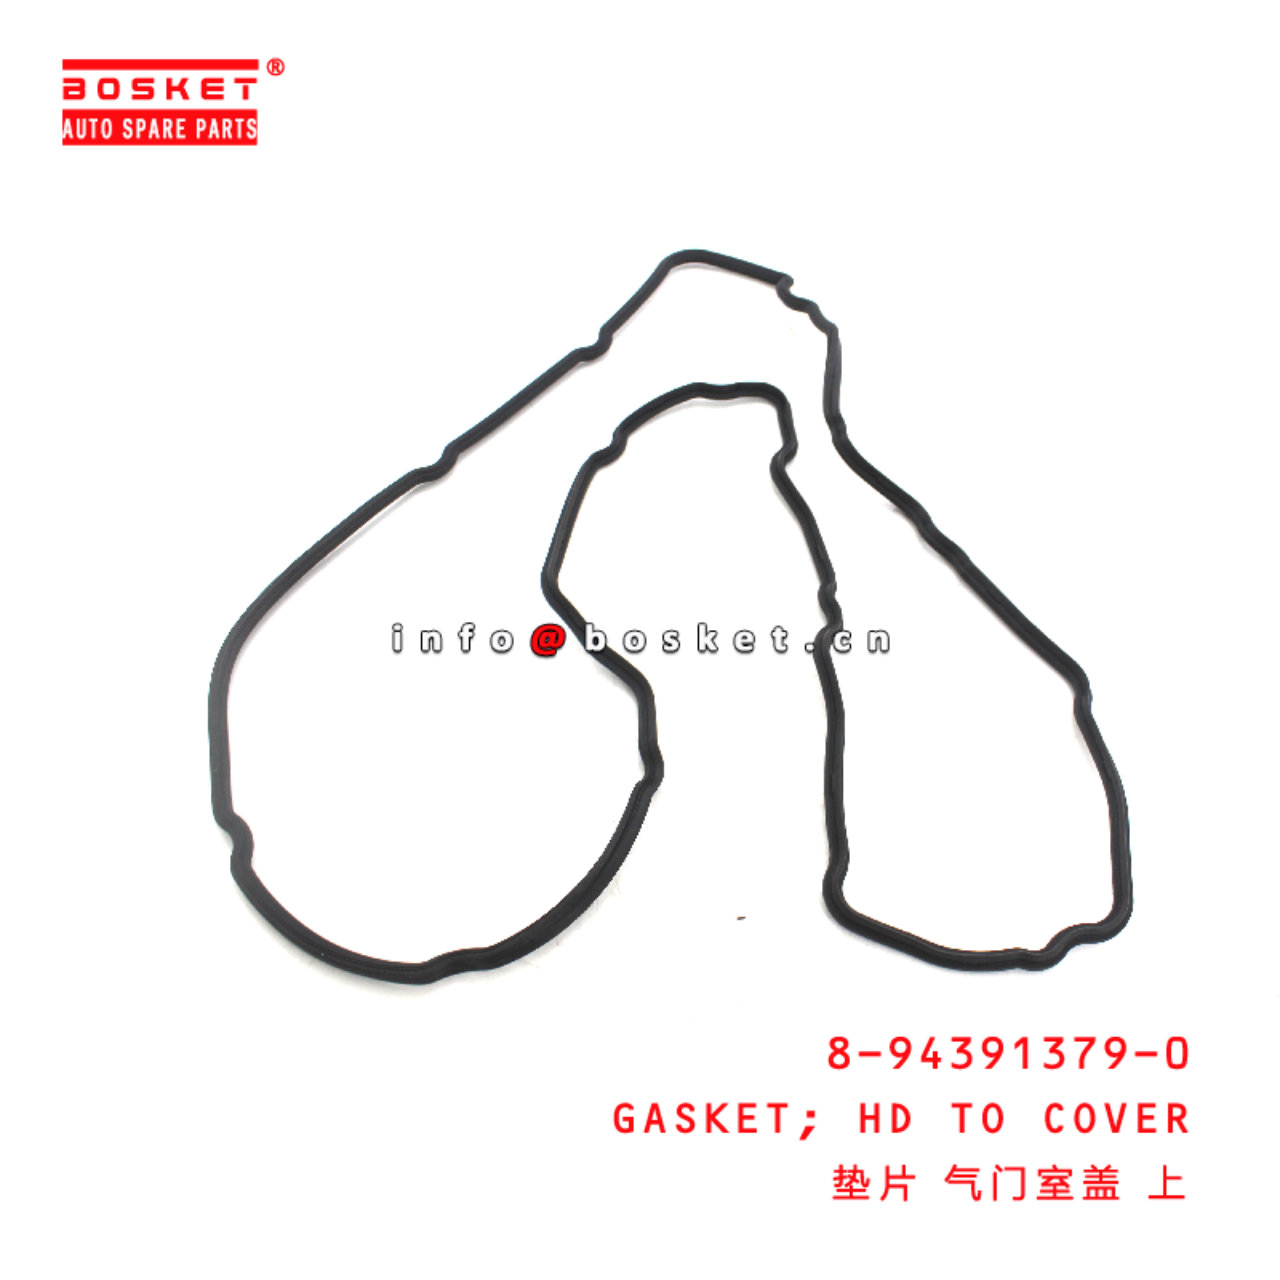 8-94391379-0 Head To Cover Gasket suitable for ISUZU  6HK1 8943913790